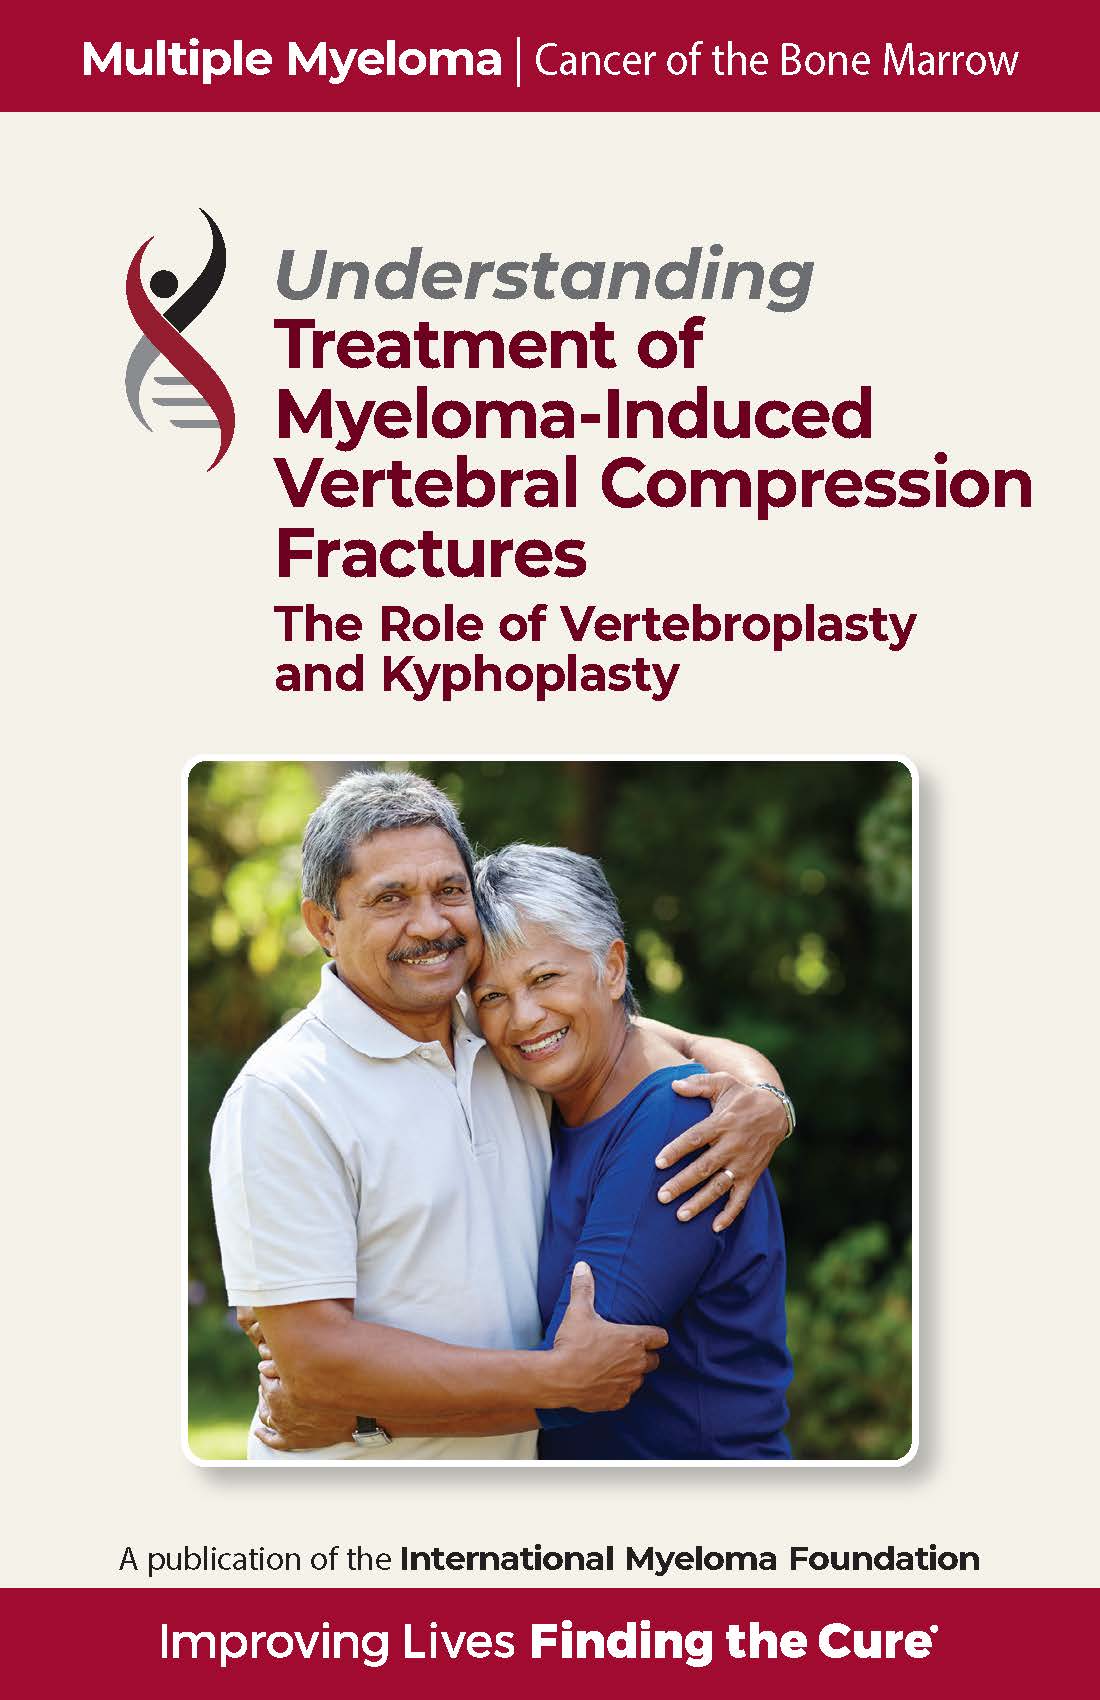 IMF Publication - Understanding Treatment of Myeloma-Induced Vertebral Compression Fractures